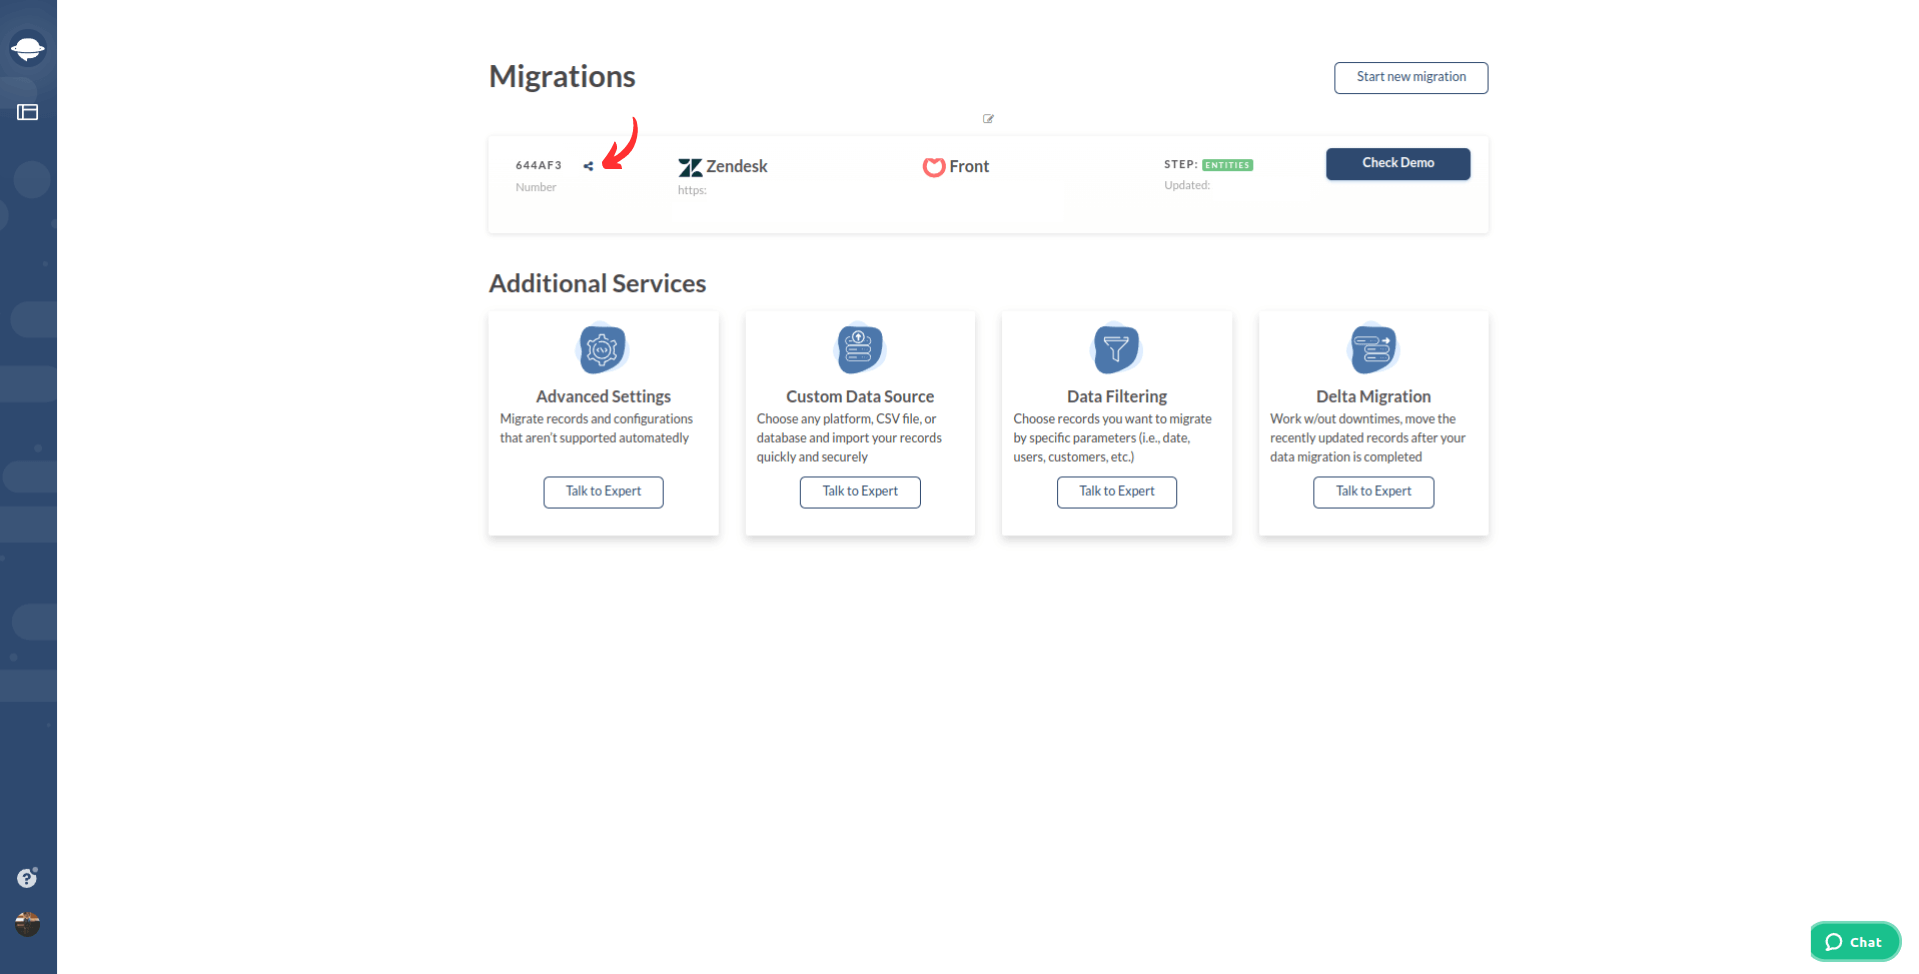 Migration Wizard - How to Share Data Migration